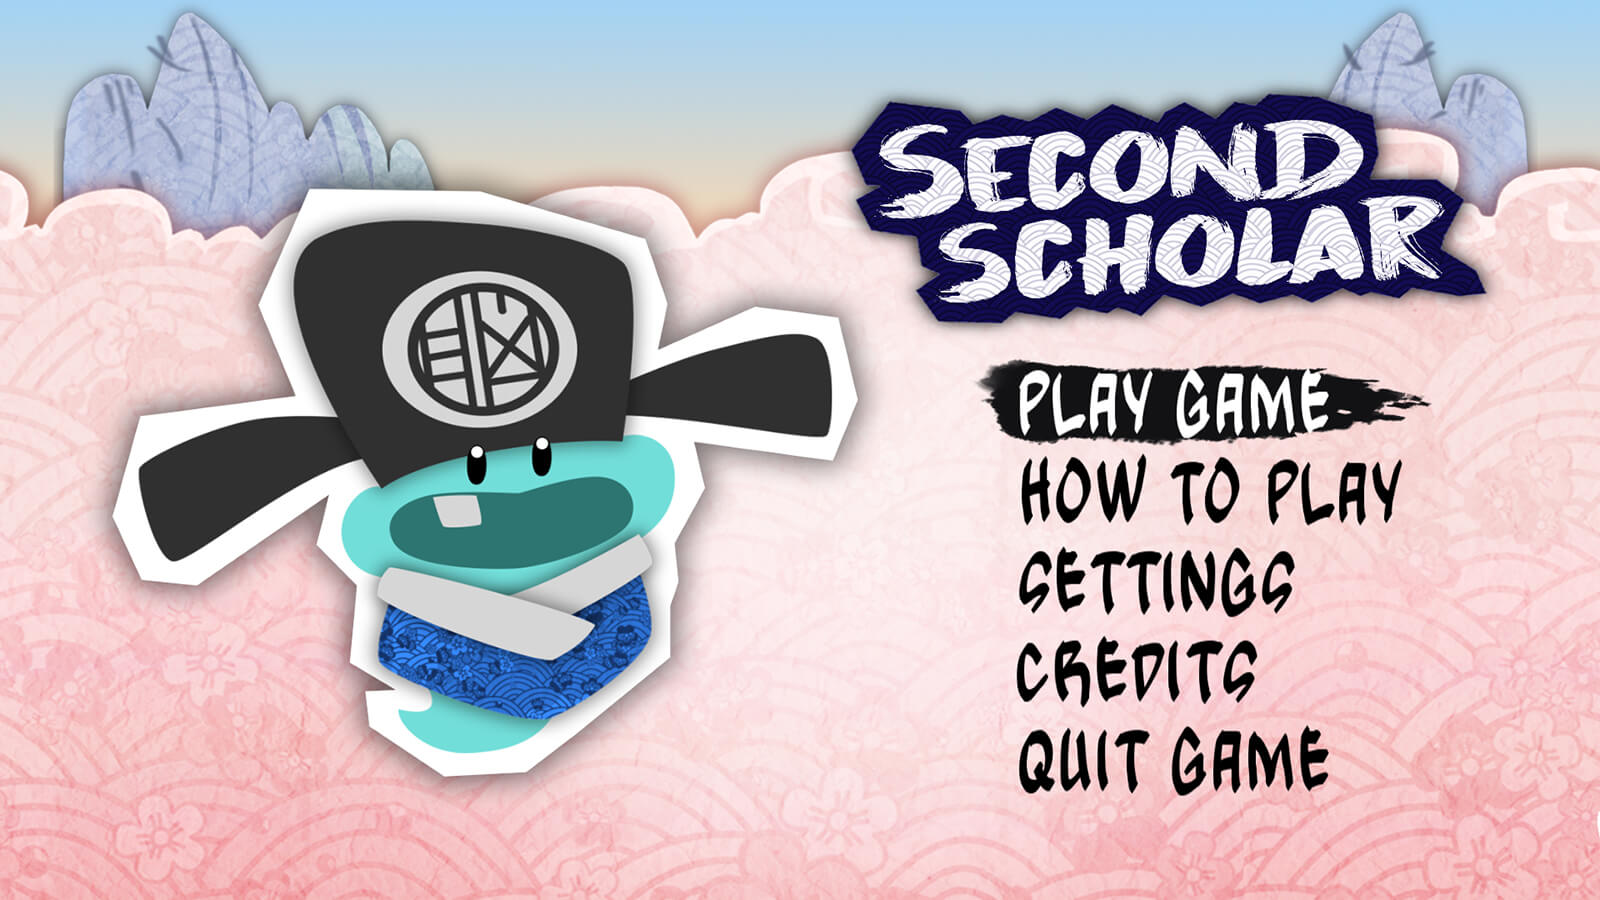 A small blue character wearing traditional "spread-horn" hat seen next on the title screen for the game "Second Scholar."